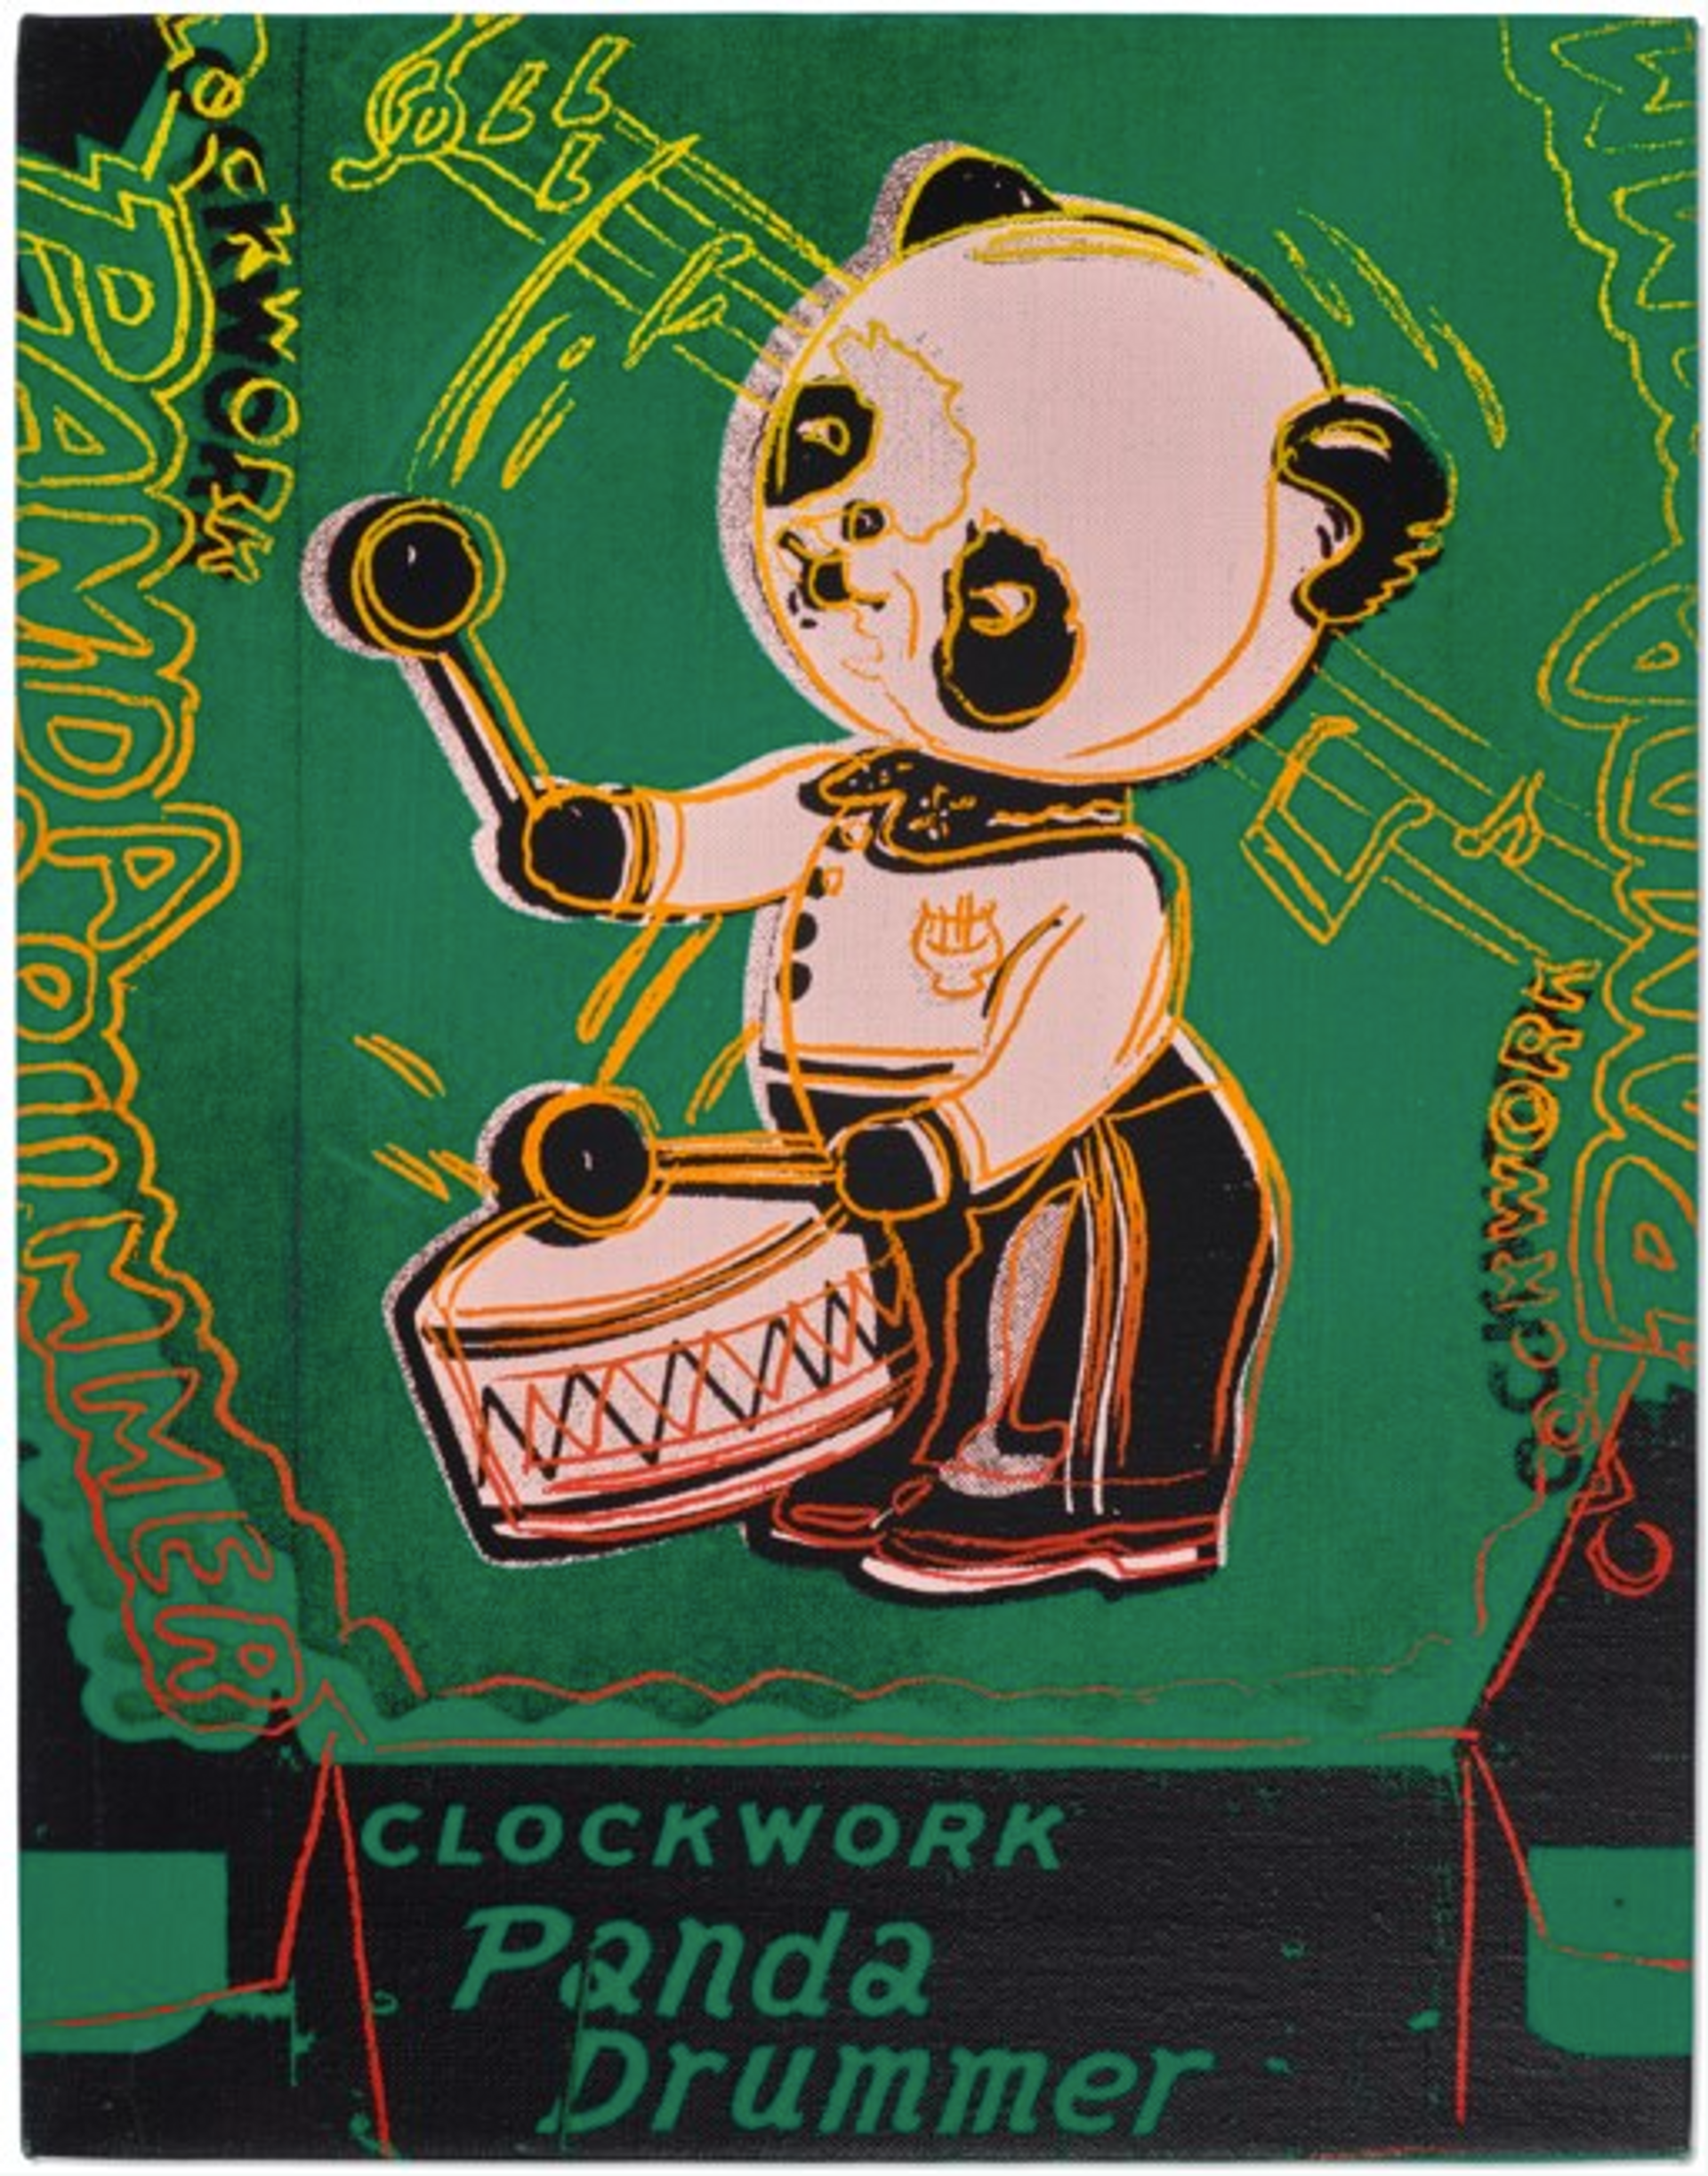 Clockwork Panda Drummer (Toy Painting) by Andy Warhol - Christie's 2023 